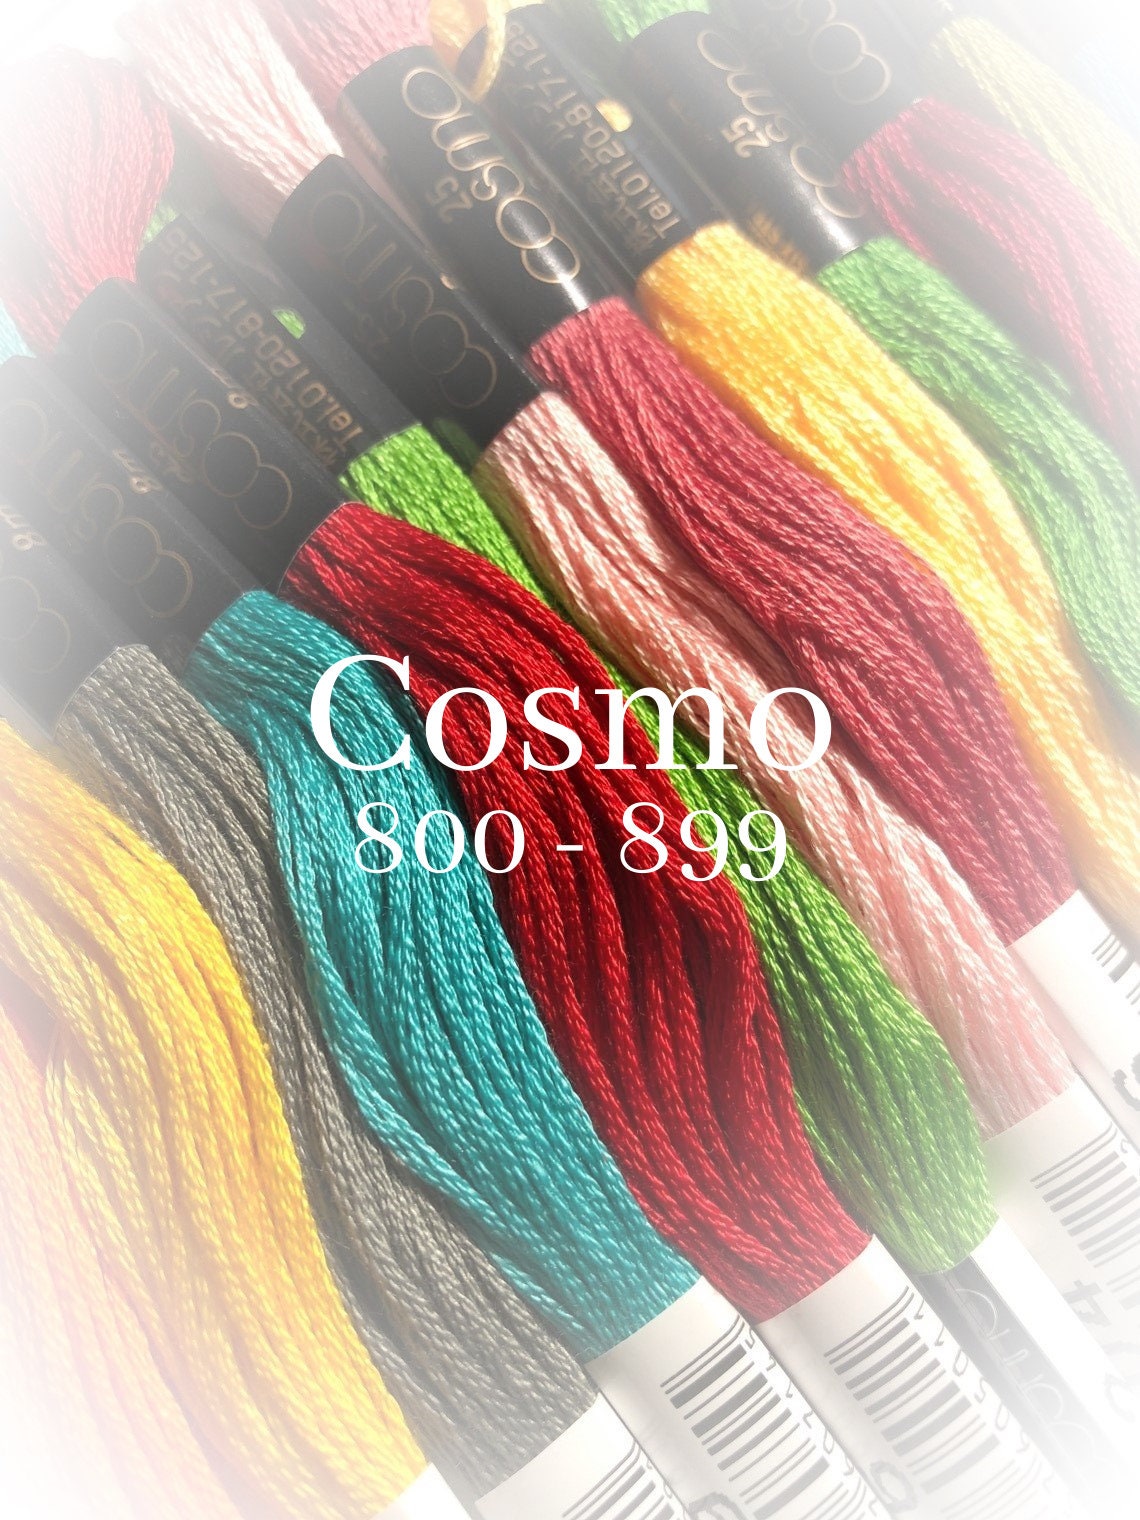 Cosmo, 800 - 899, 6 Strand Cotton Floss, Size 25, Embroidery Floss, Cross  Stitch Floss, Punch Needle, Embroidery, Wool Applique, Quilting